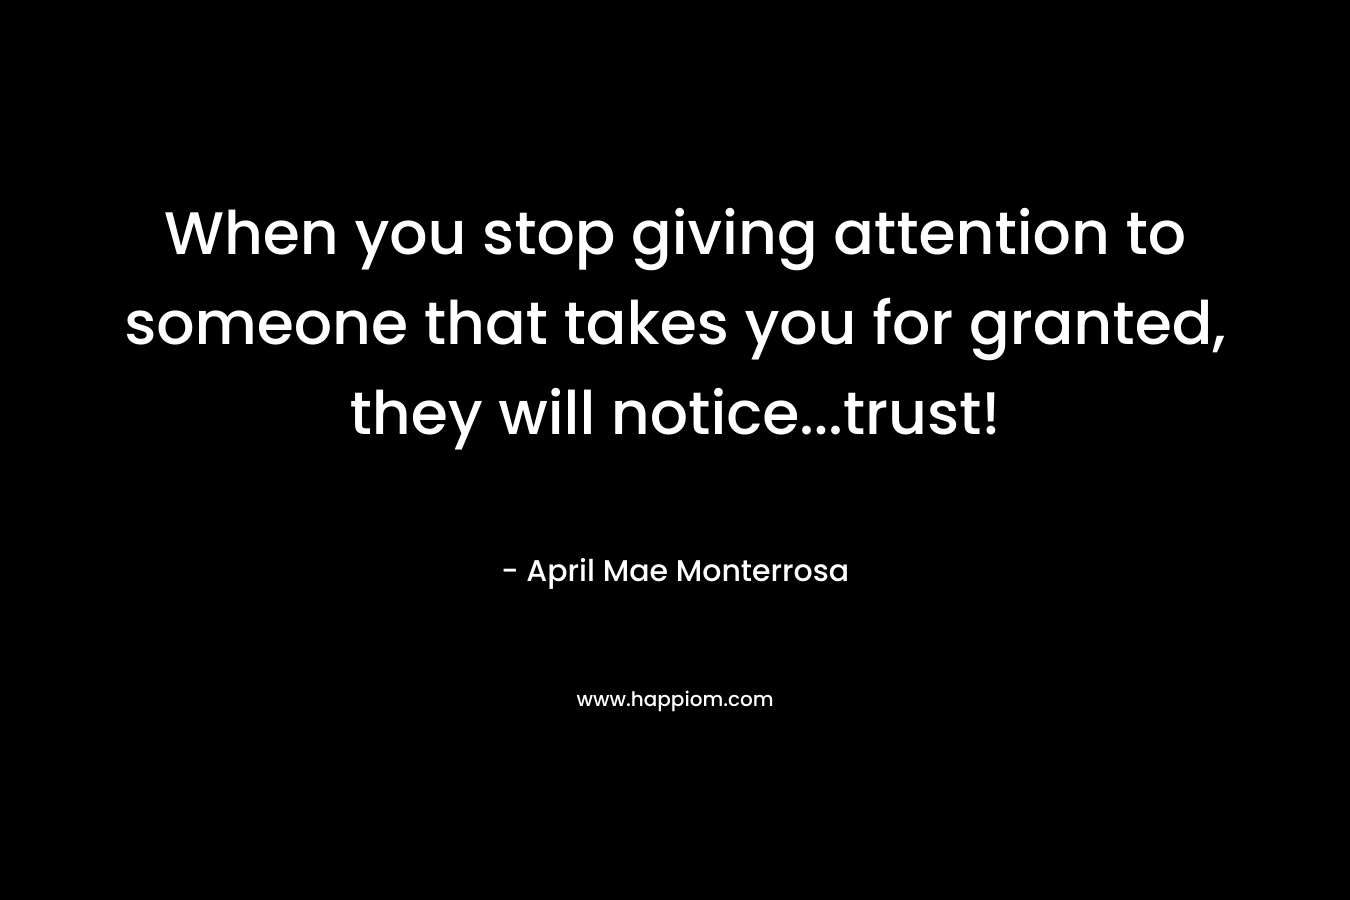 When you stop giving attention to someone that takes you for granted, they will notice...trust!